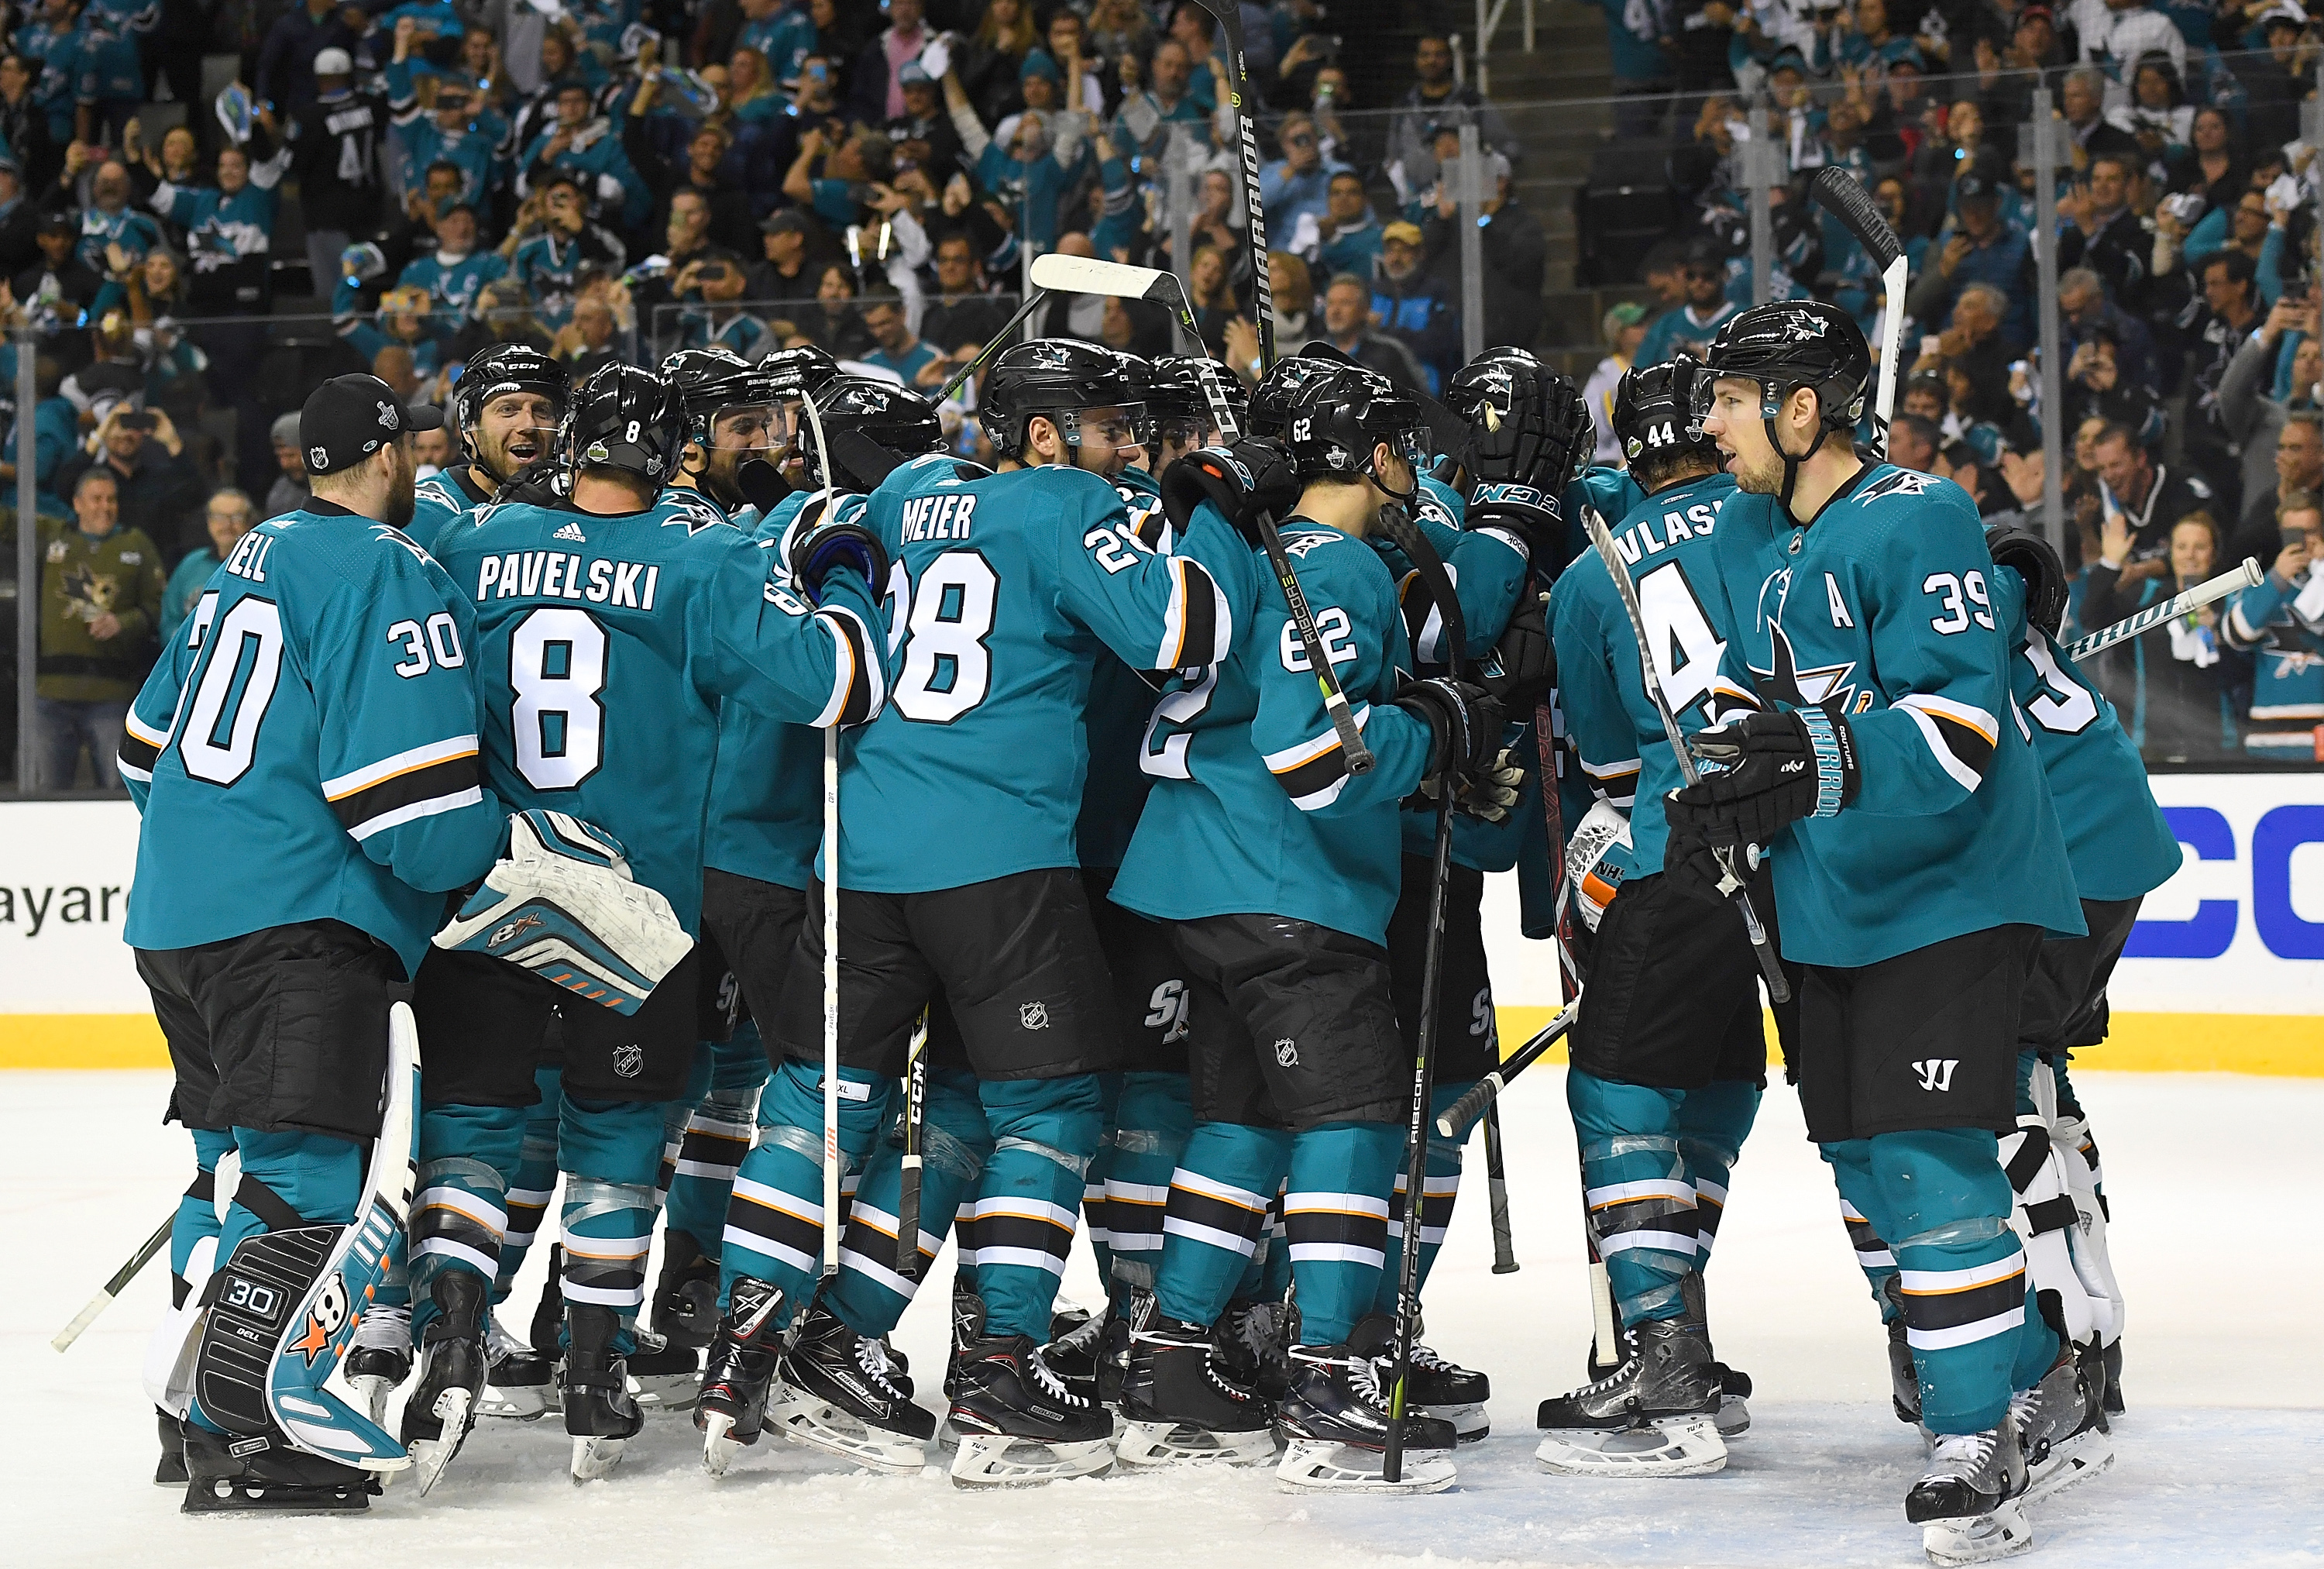 SAN JOSE, CA - APRIL 18: The San Jose Sharks celebrate after defeating the Anaheim Ducks 2-1 in Game Four of the Western Conference First Round during the 2018 NHL Stanley Cup Playoffs at SAP Center on April 18, 2018 in San Jose, California. The Sharks wo